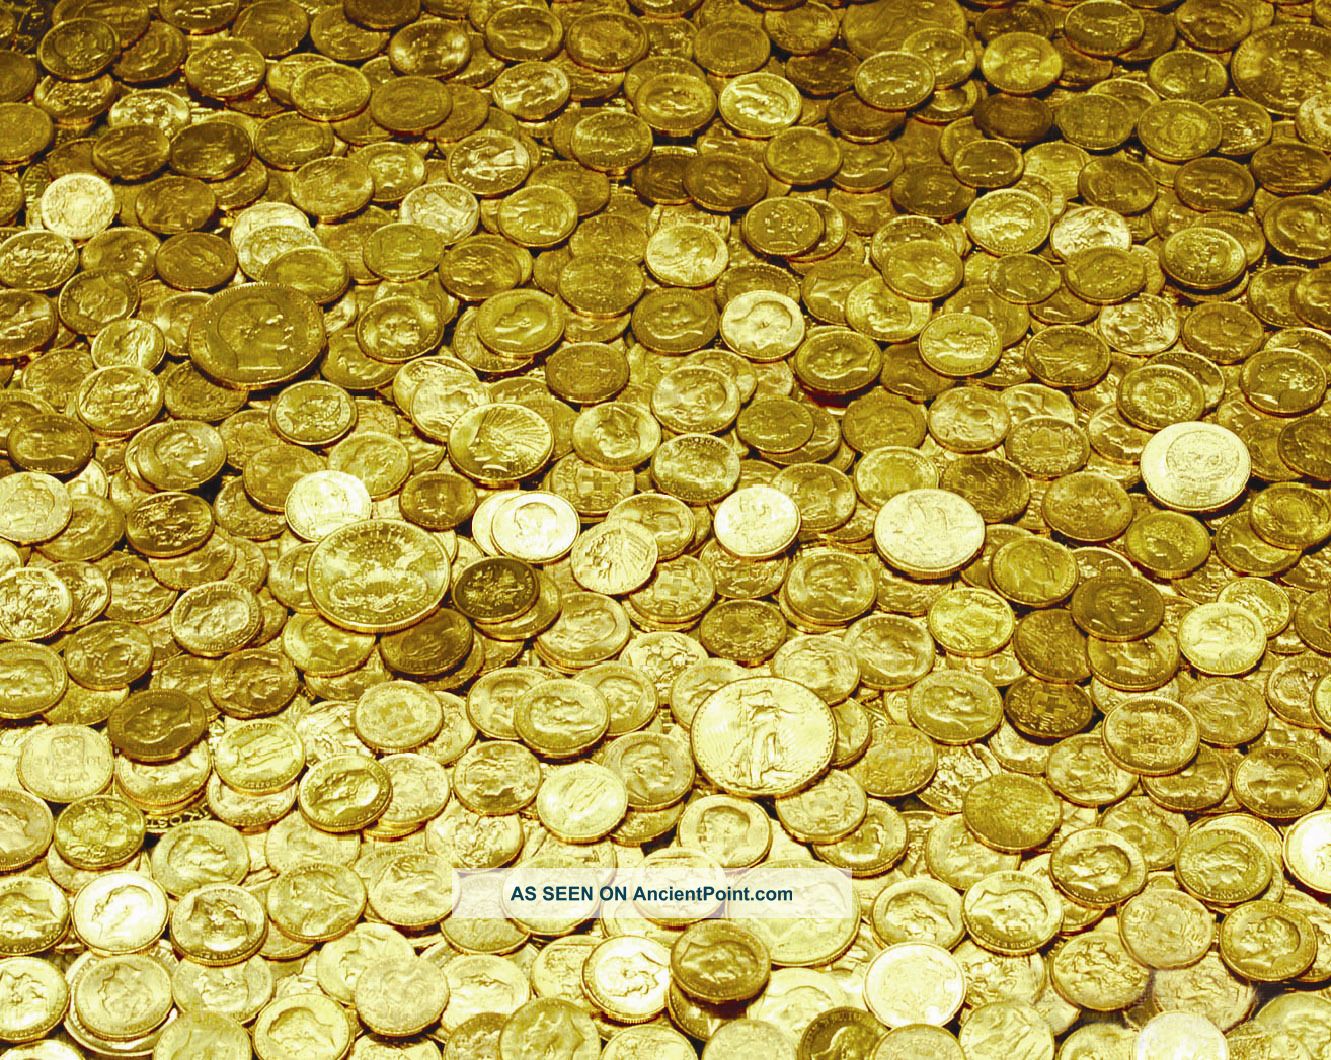 $$$ ~ 125 Presidential Gold Dollars. $ Dollar Coins. With Collectors Dream. $$$ The Americas photo